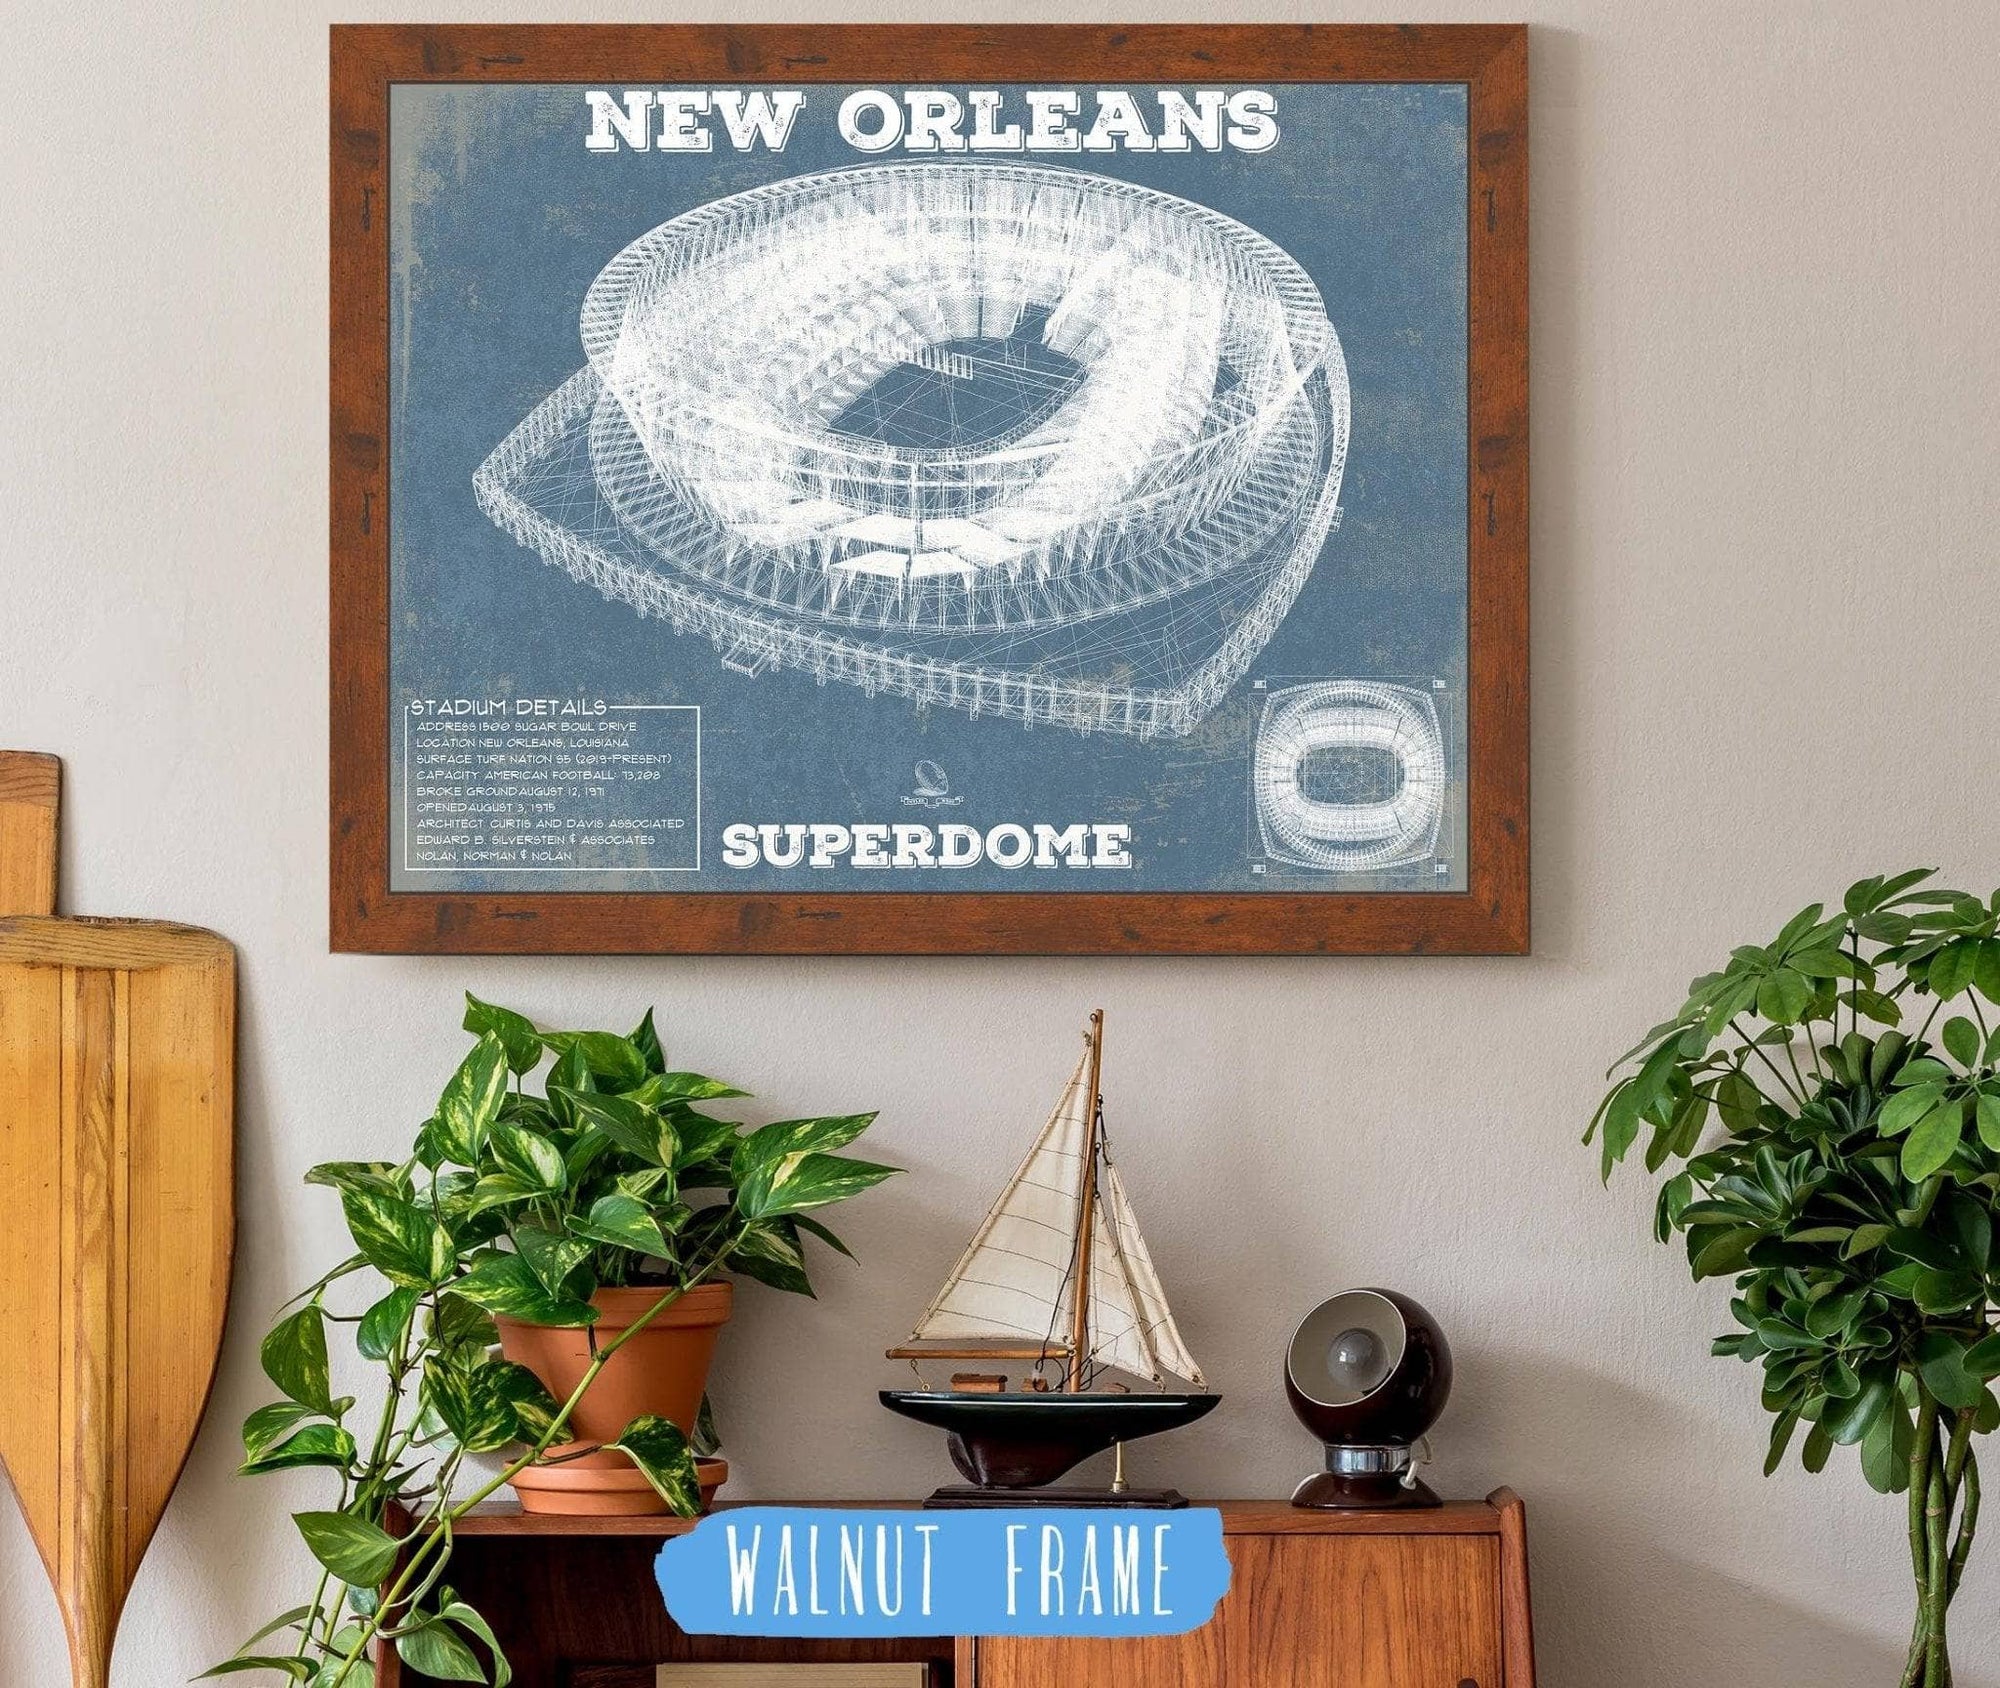 Cutler West Pro Football Collection 14" x 11" / Walnut Frame New Orleans Saints Superdome Seating Chart - Vintage Football  Team Color Print 235353090